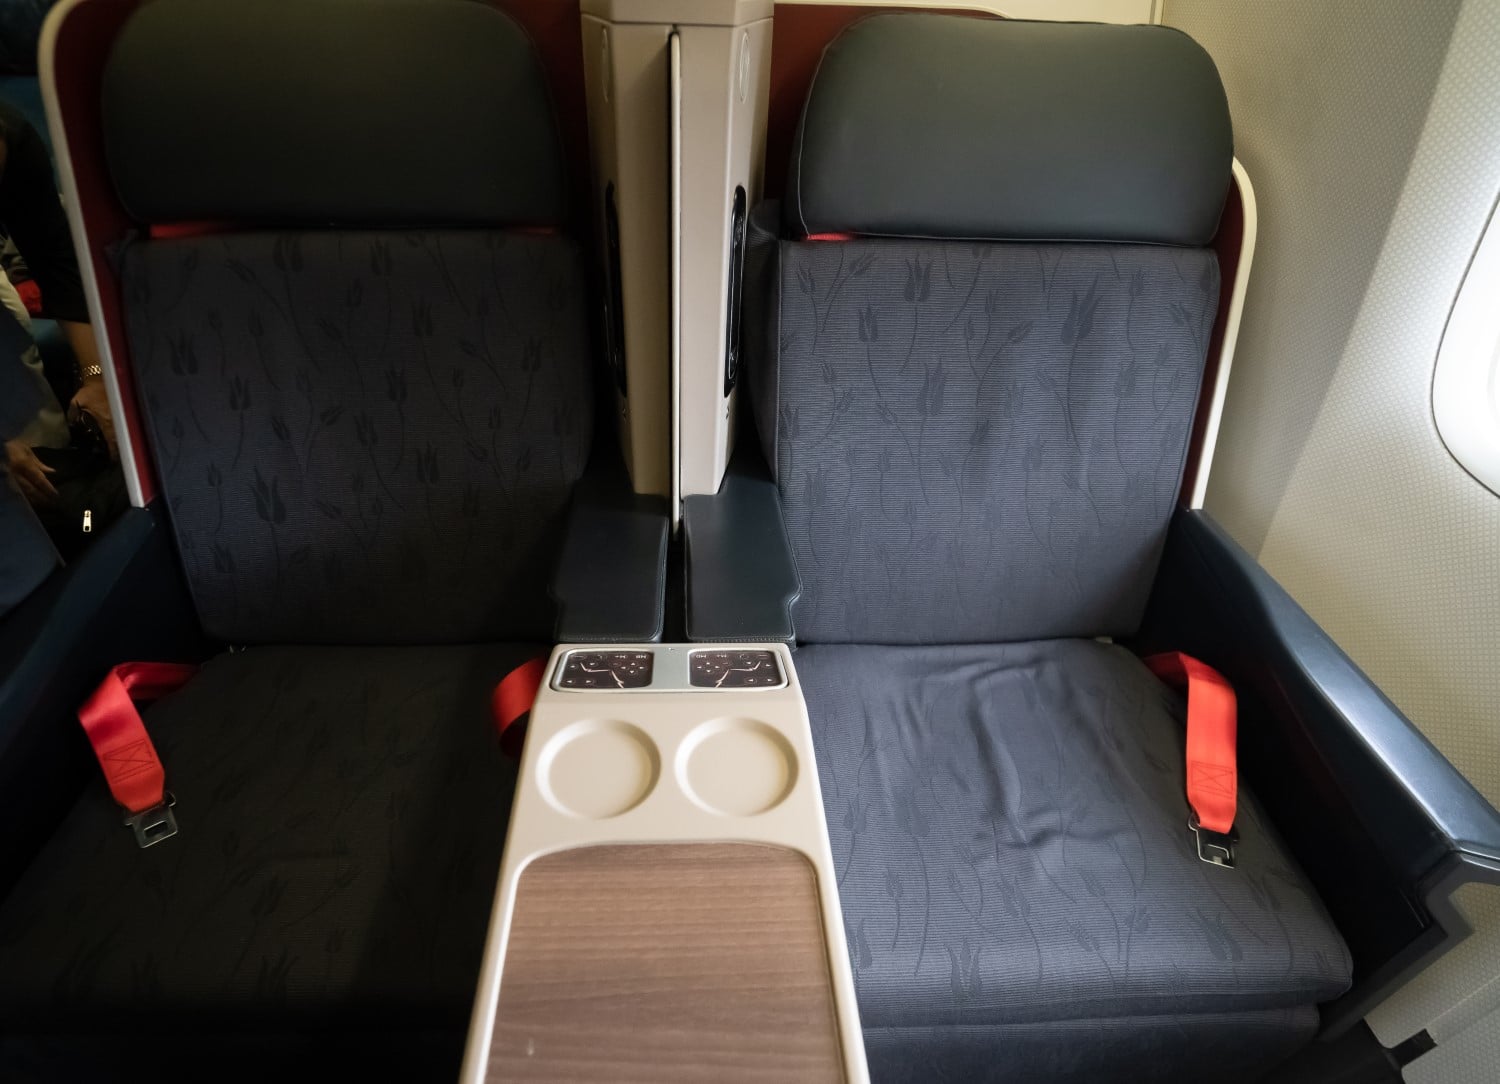 Turkish Airlines 777 business class seats side by side.